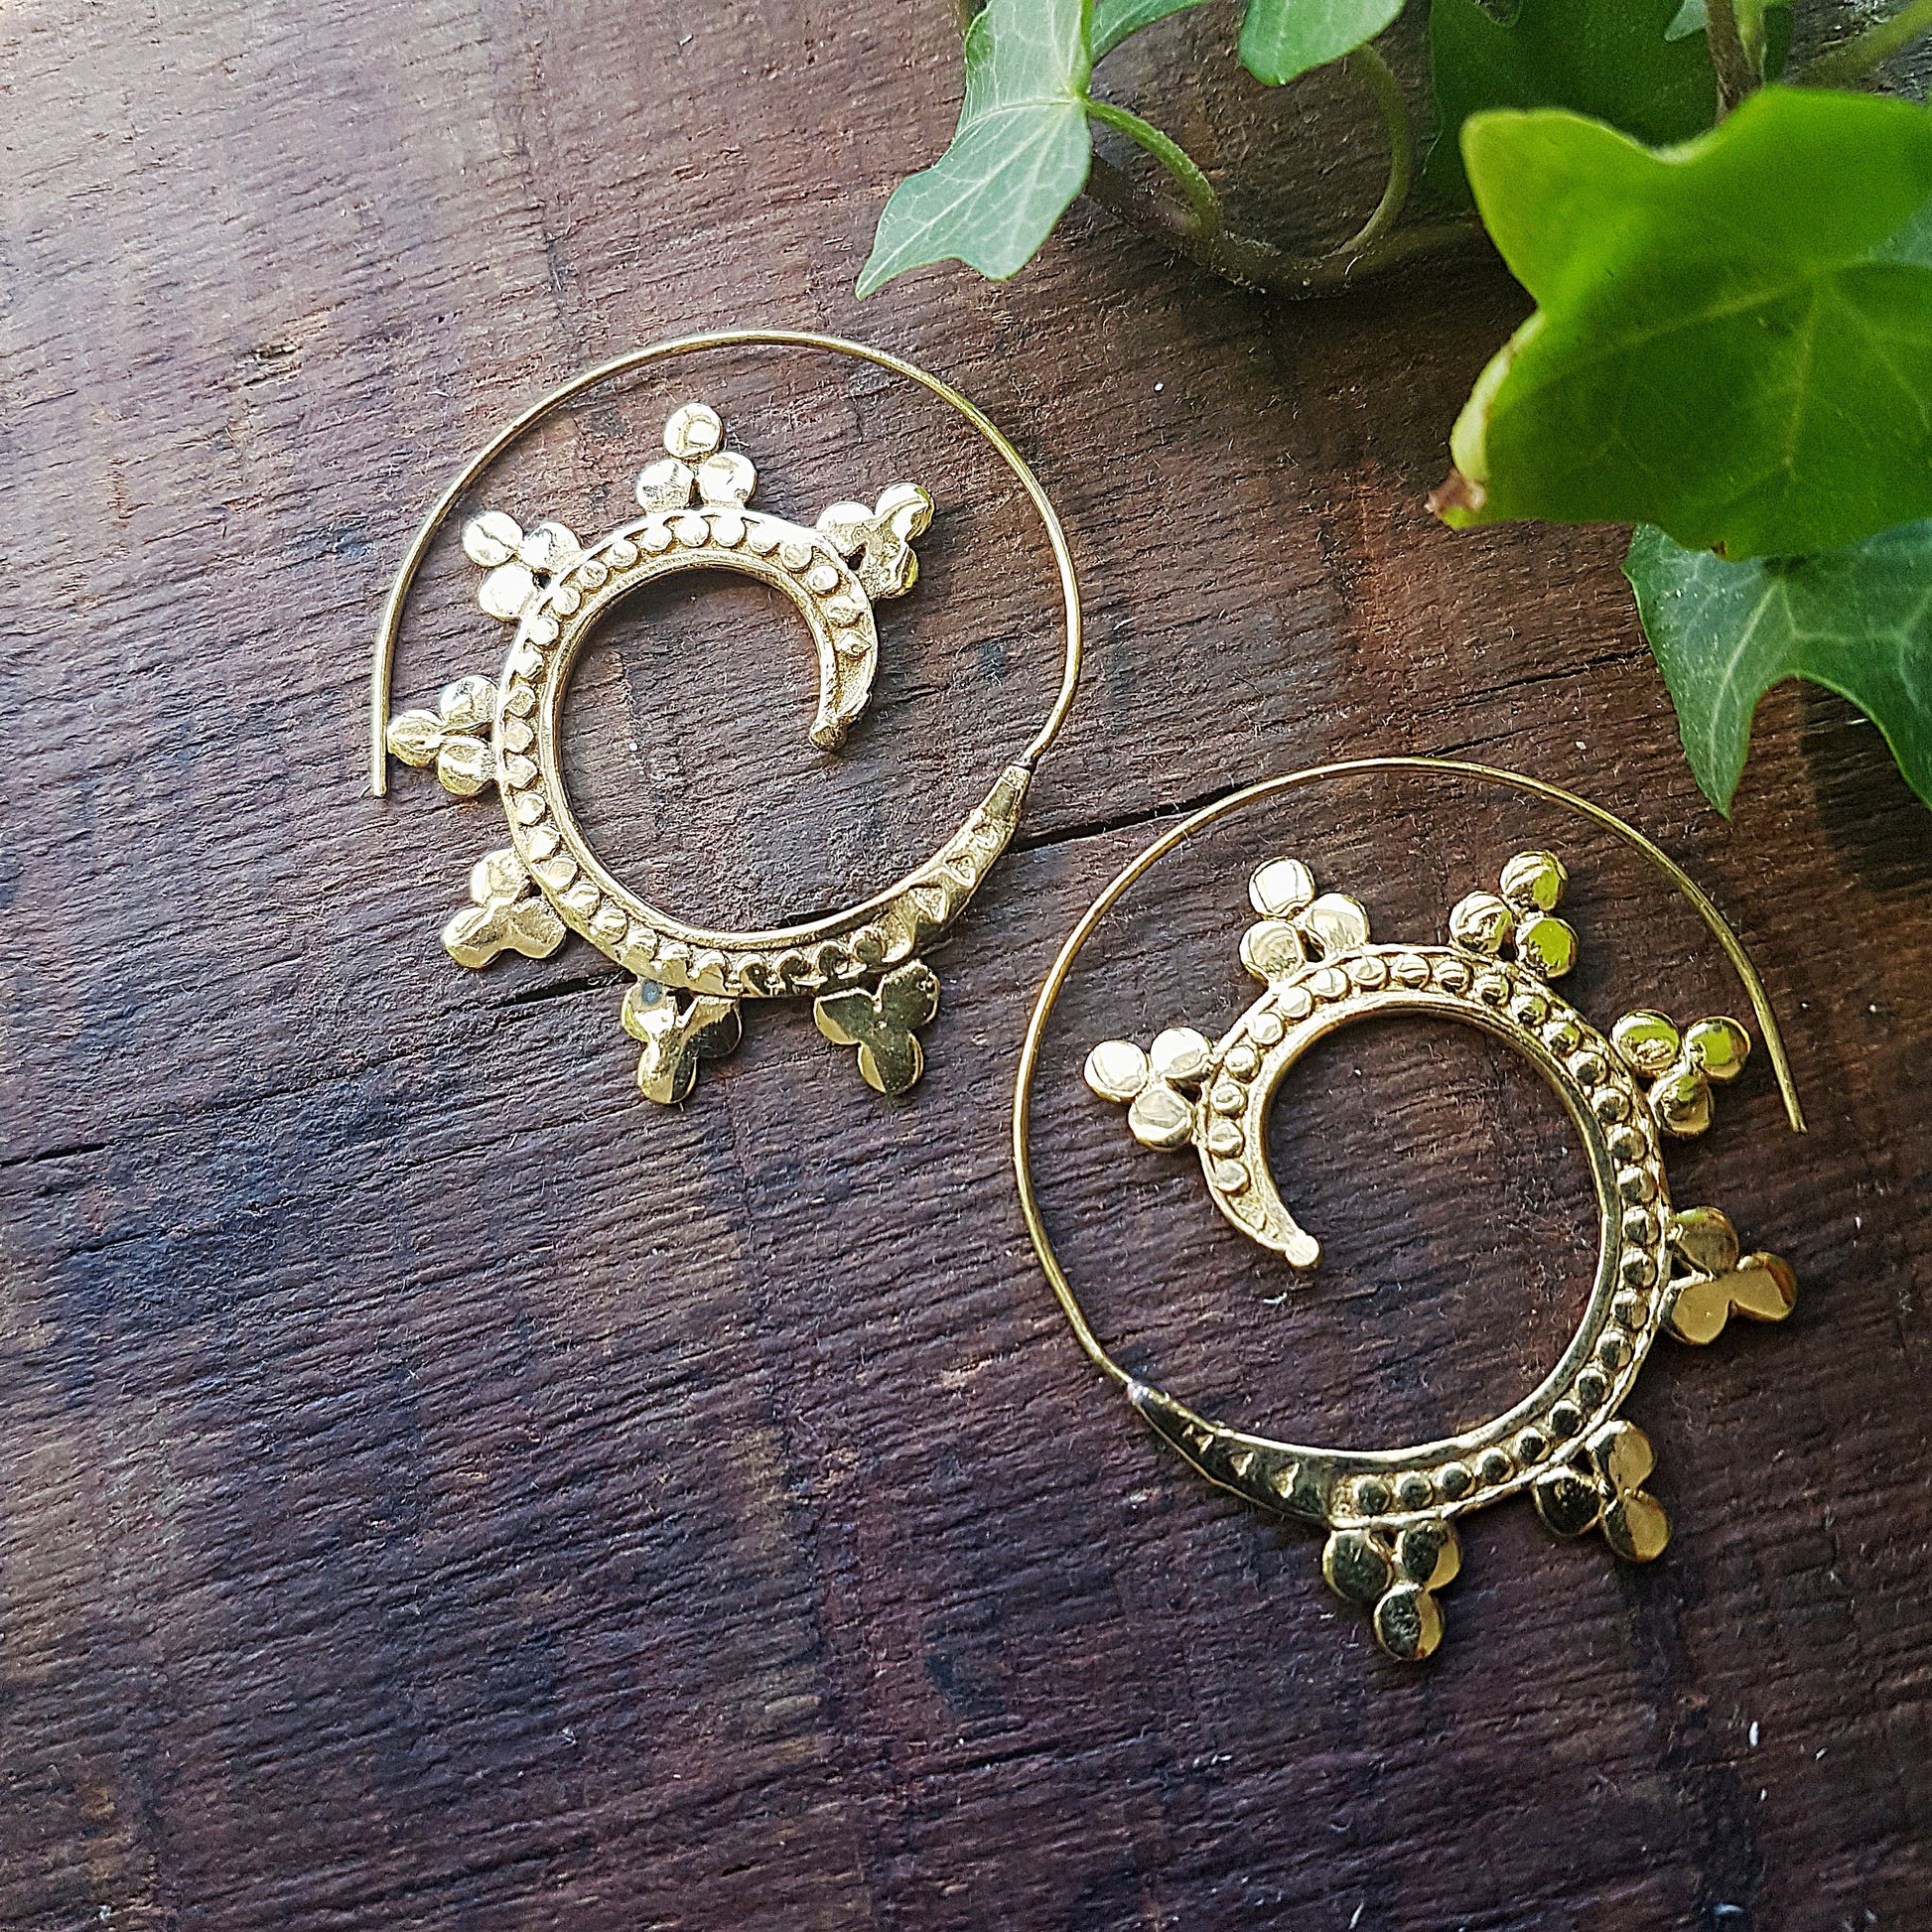 Gold threader earrings in open hoop spiral design. Boho tribal style in a unique hammered metal disc wave pattern. 1.75 inch diameter. - Vintage India Ca